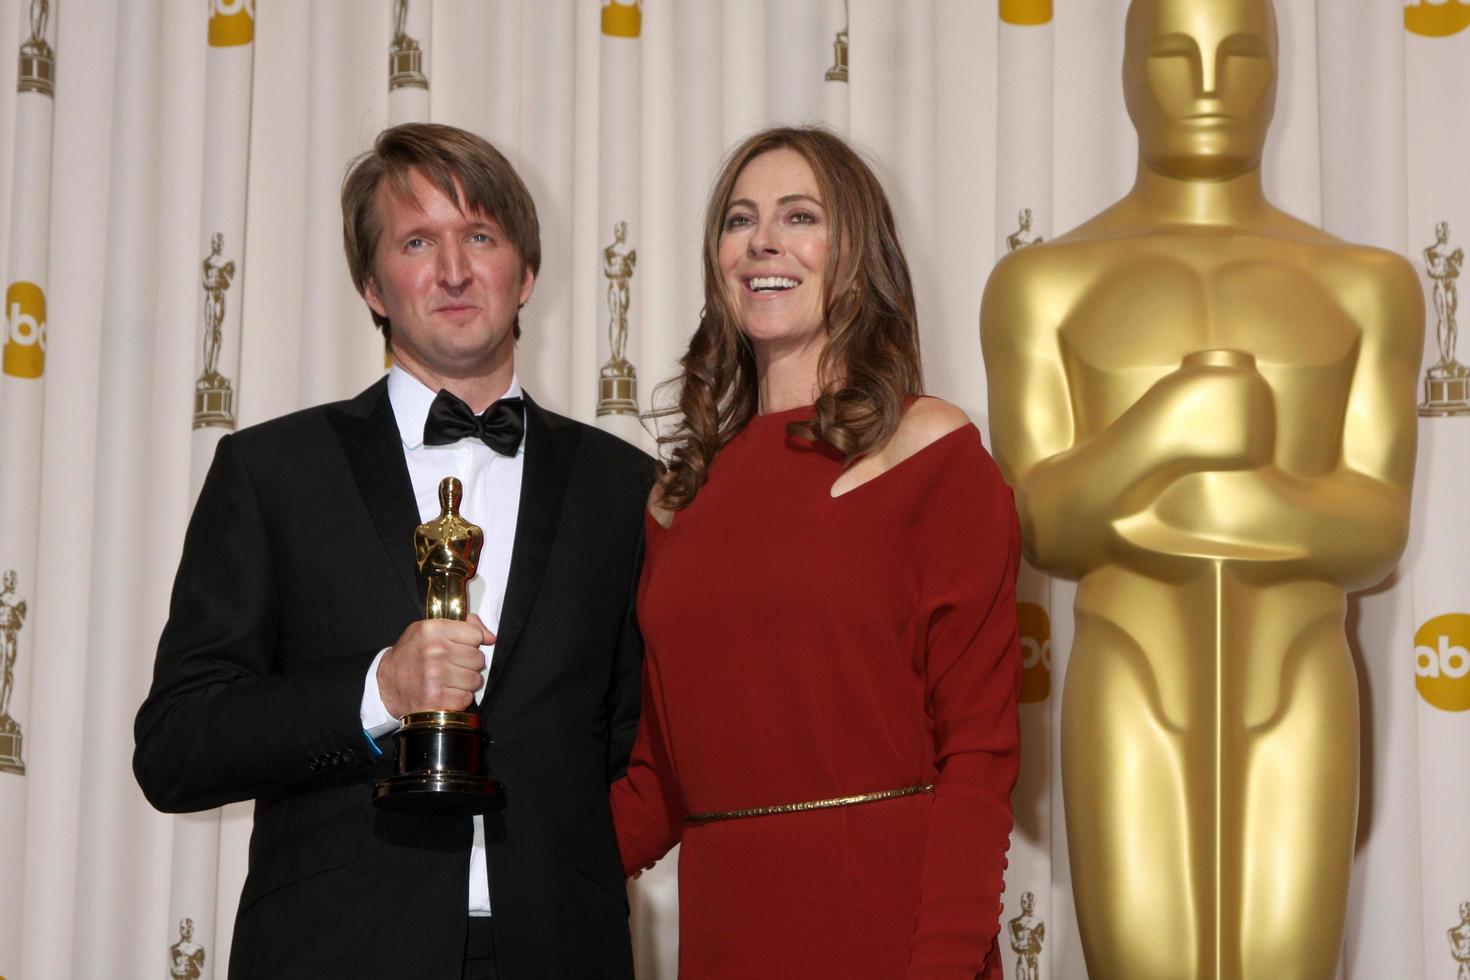 LOS ANGELES  27 - Tom Hooper, Kathryn Bigelow in the Press Room at the 83rd Academy Awards at Kodak Theater, Hollywood and Highland on February 27, 2011 in Los Angeles, CA photo